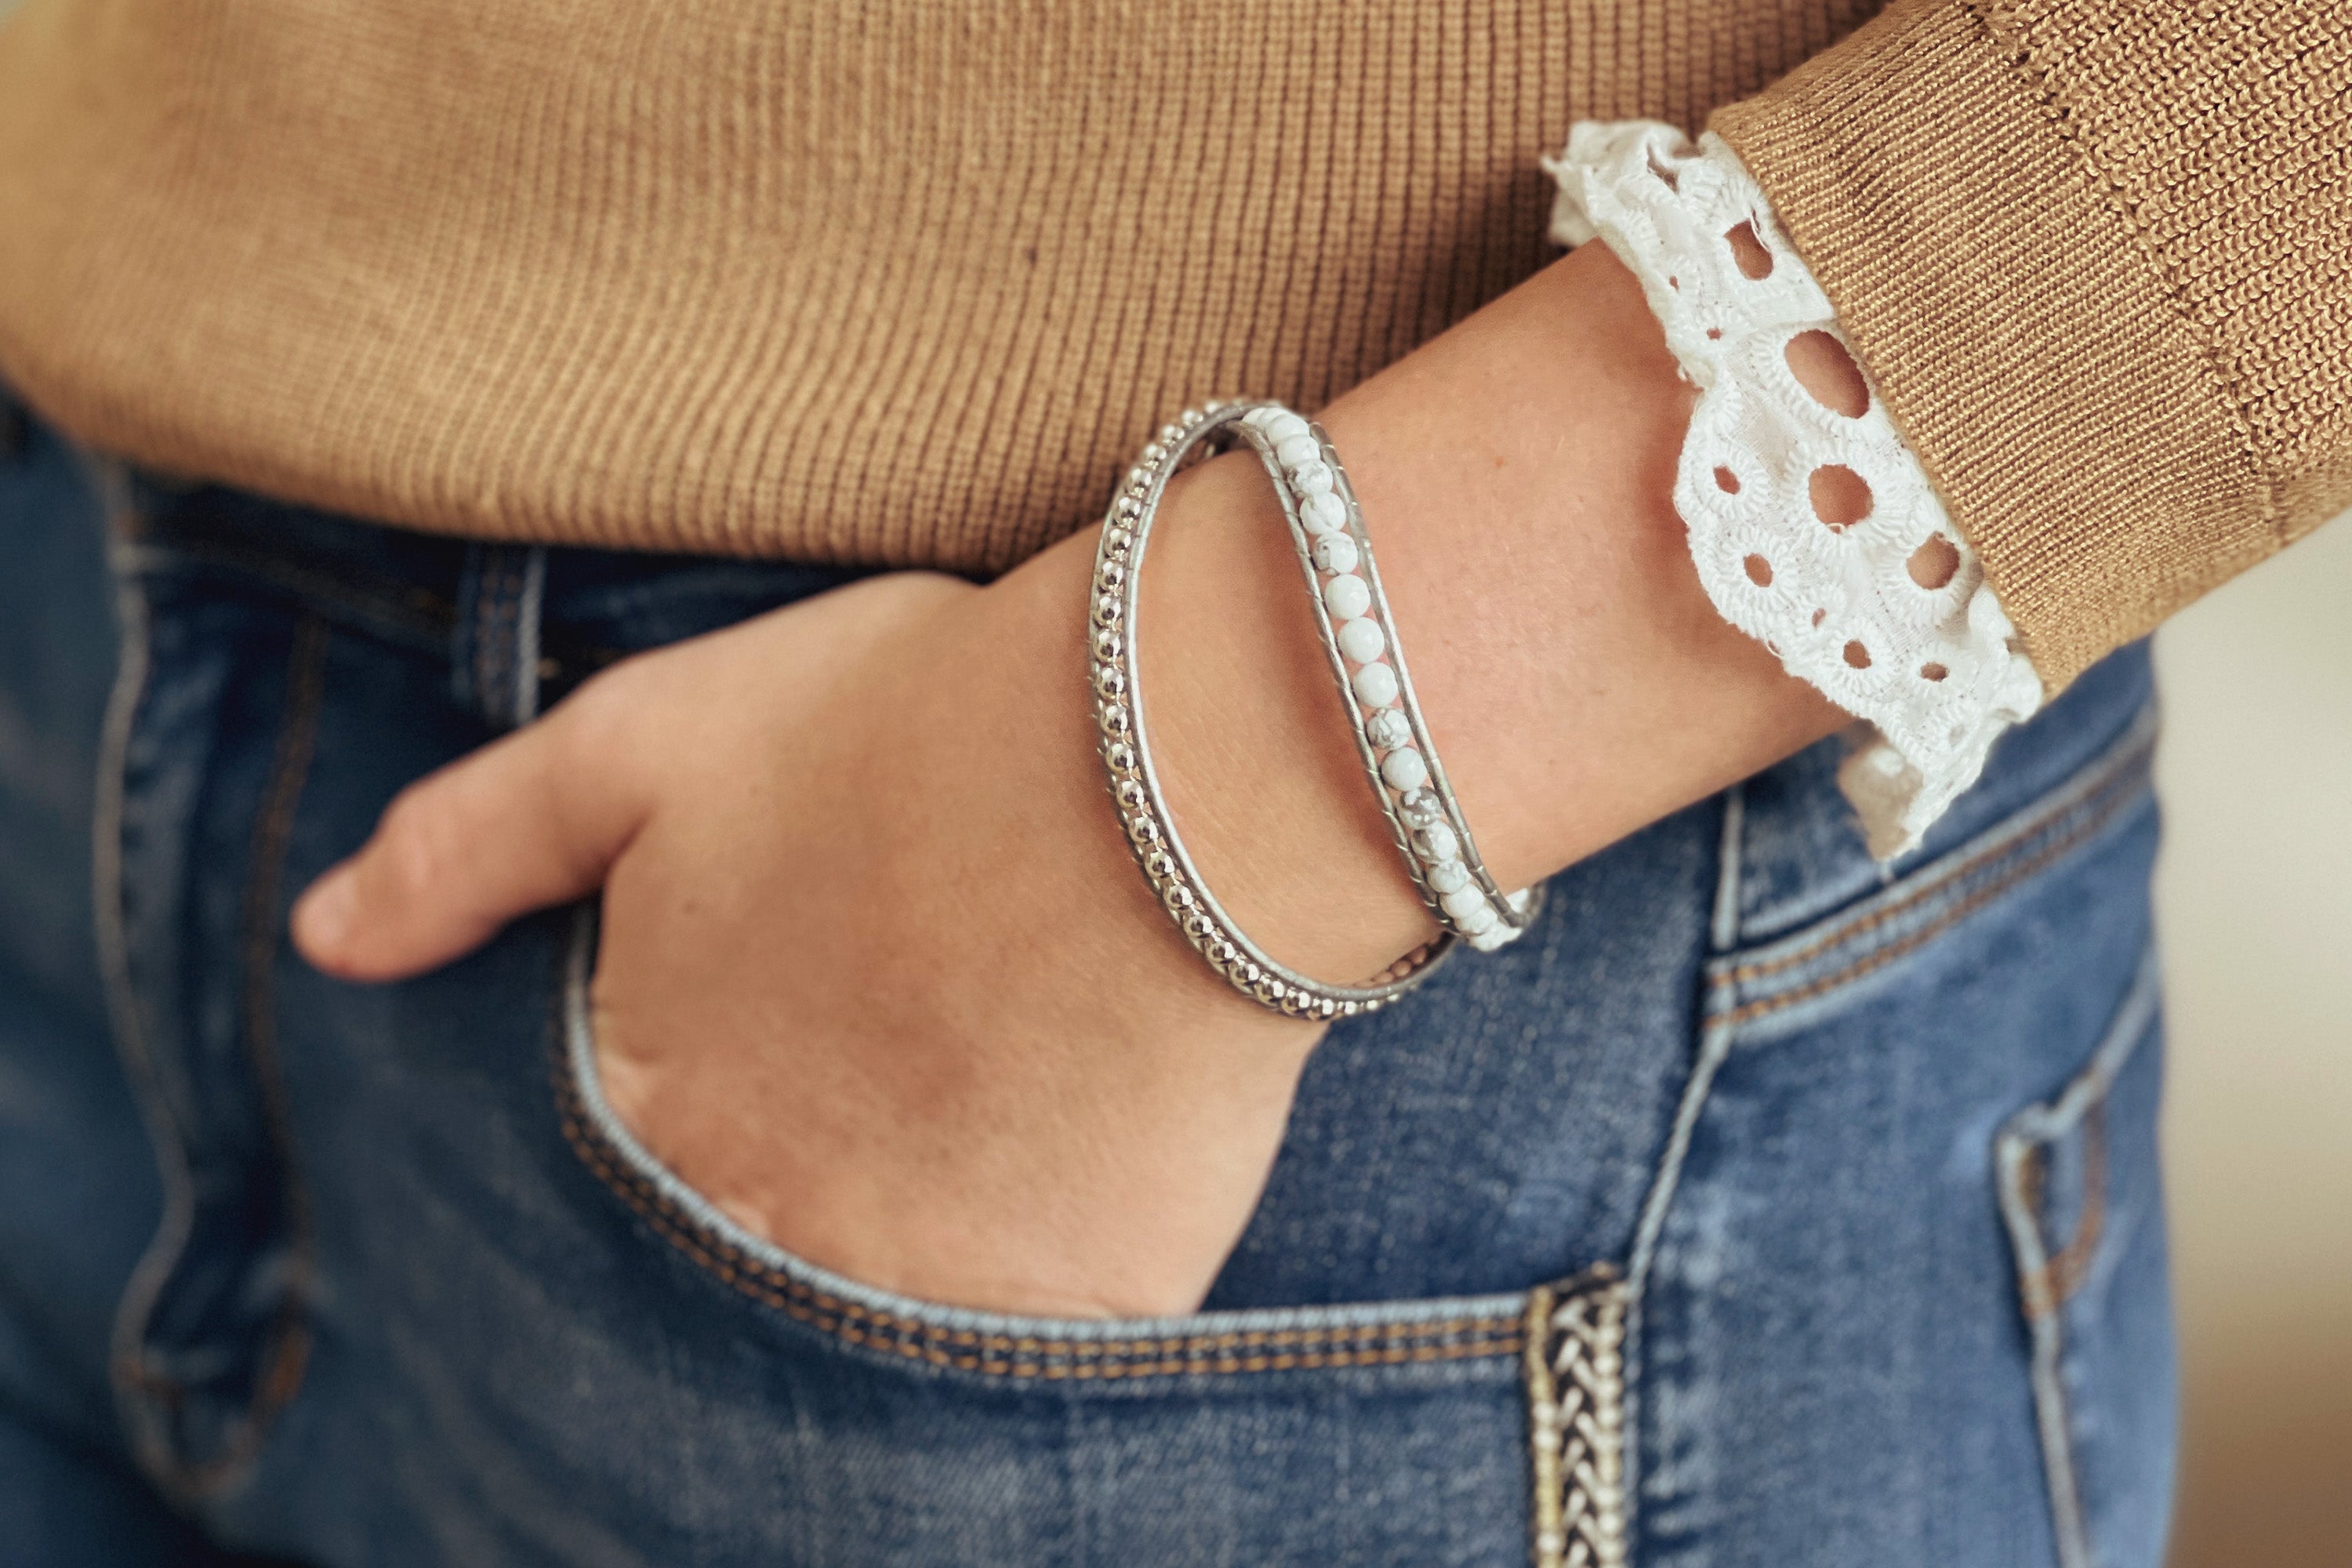 Orion Silver Leather White Jade 2 Wrap Bracelet with Silver Balls - Boho Betty